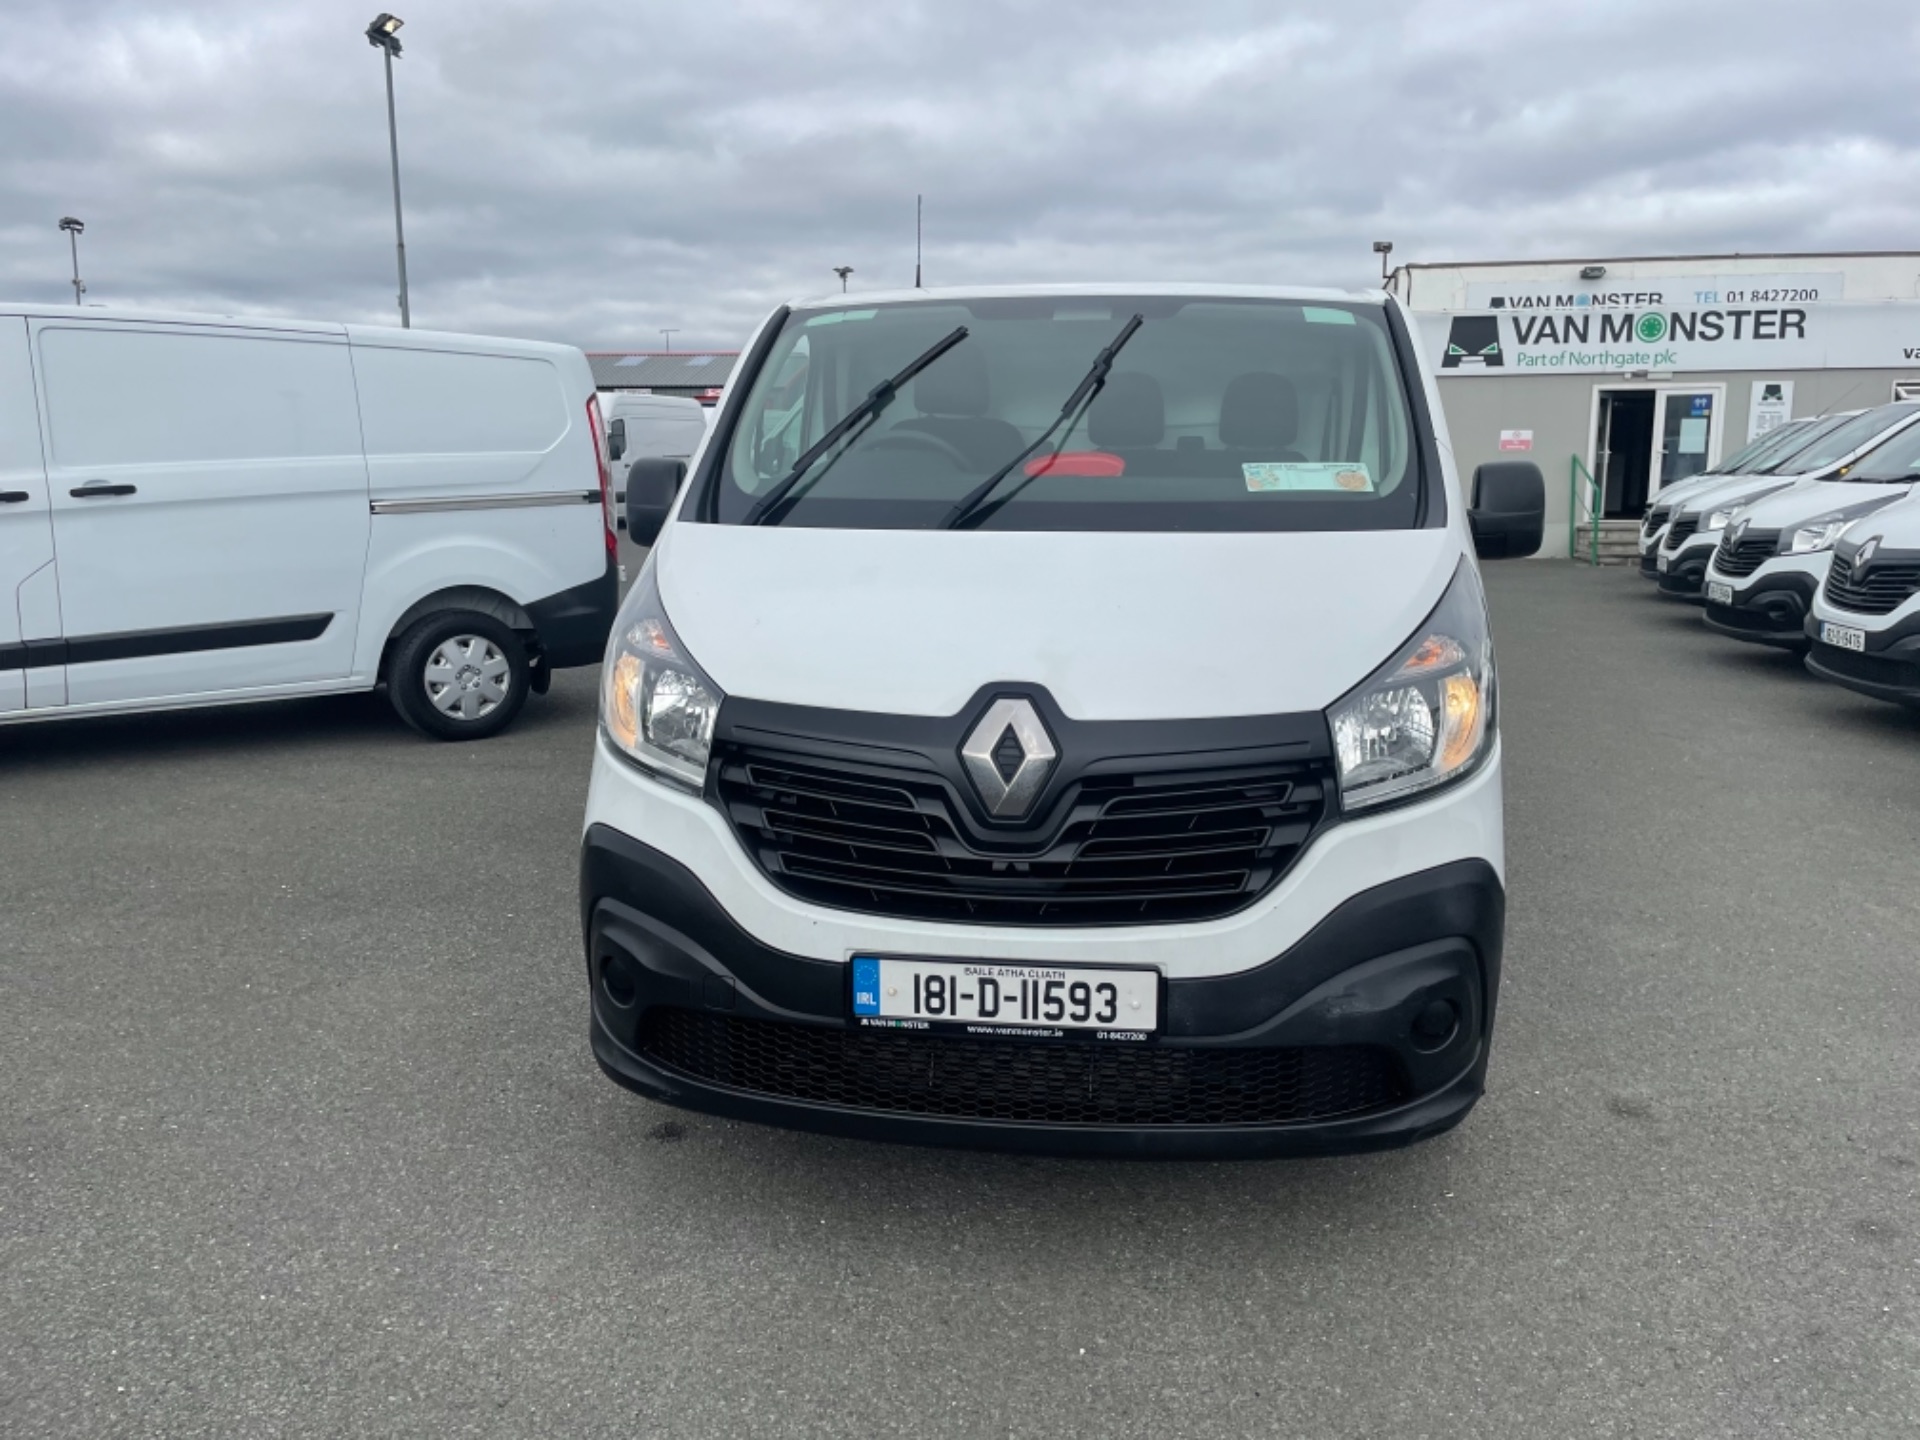 2018 Renault Trafic LL29 DCI 120 Business 3DR (181D11593) Image 2